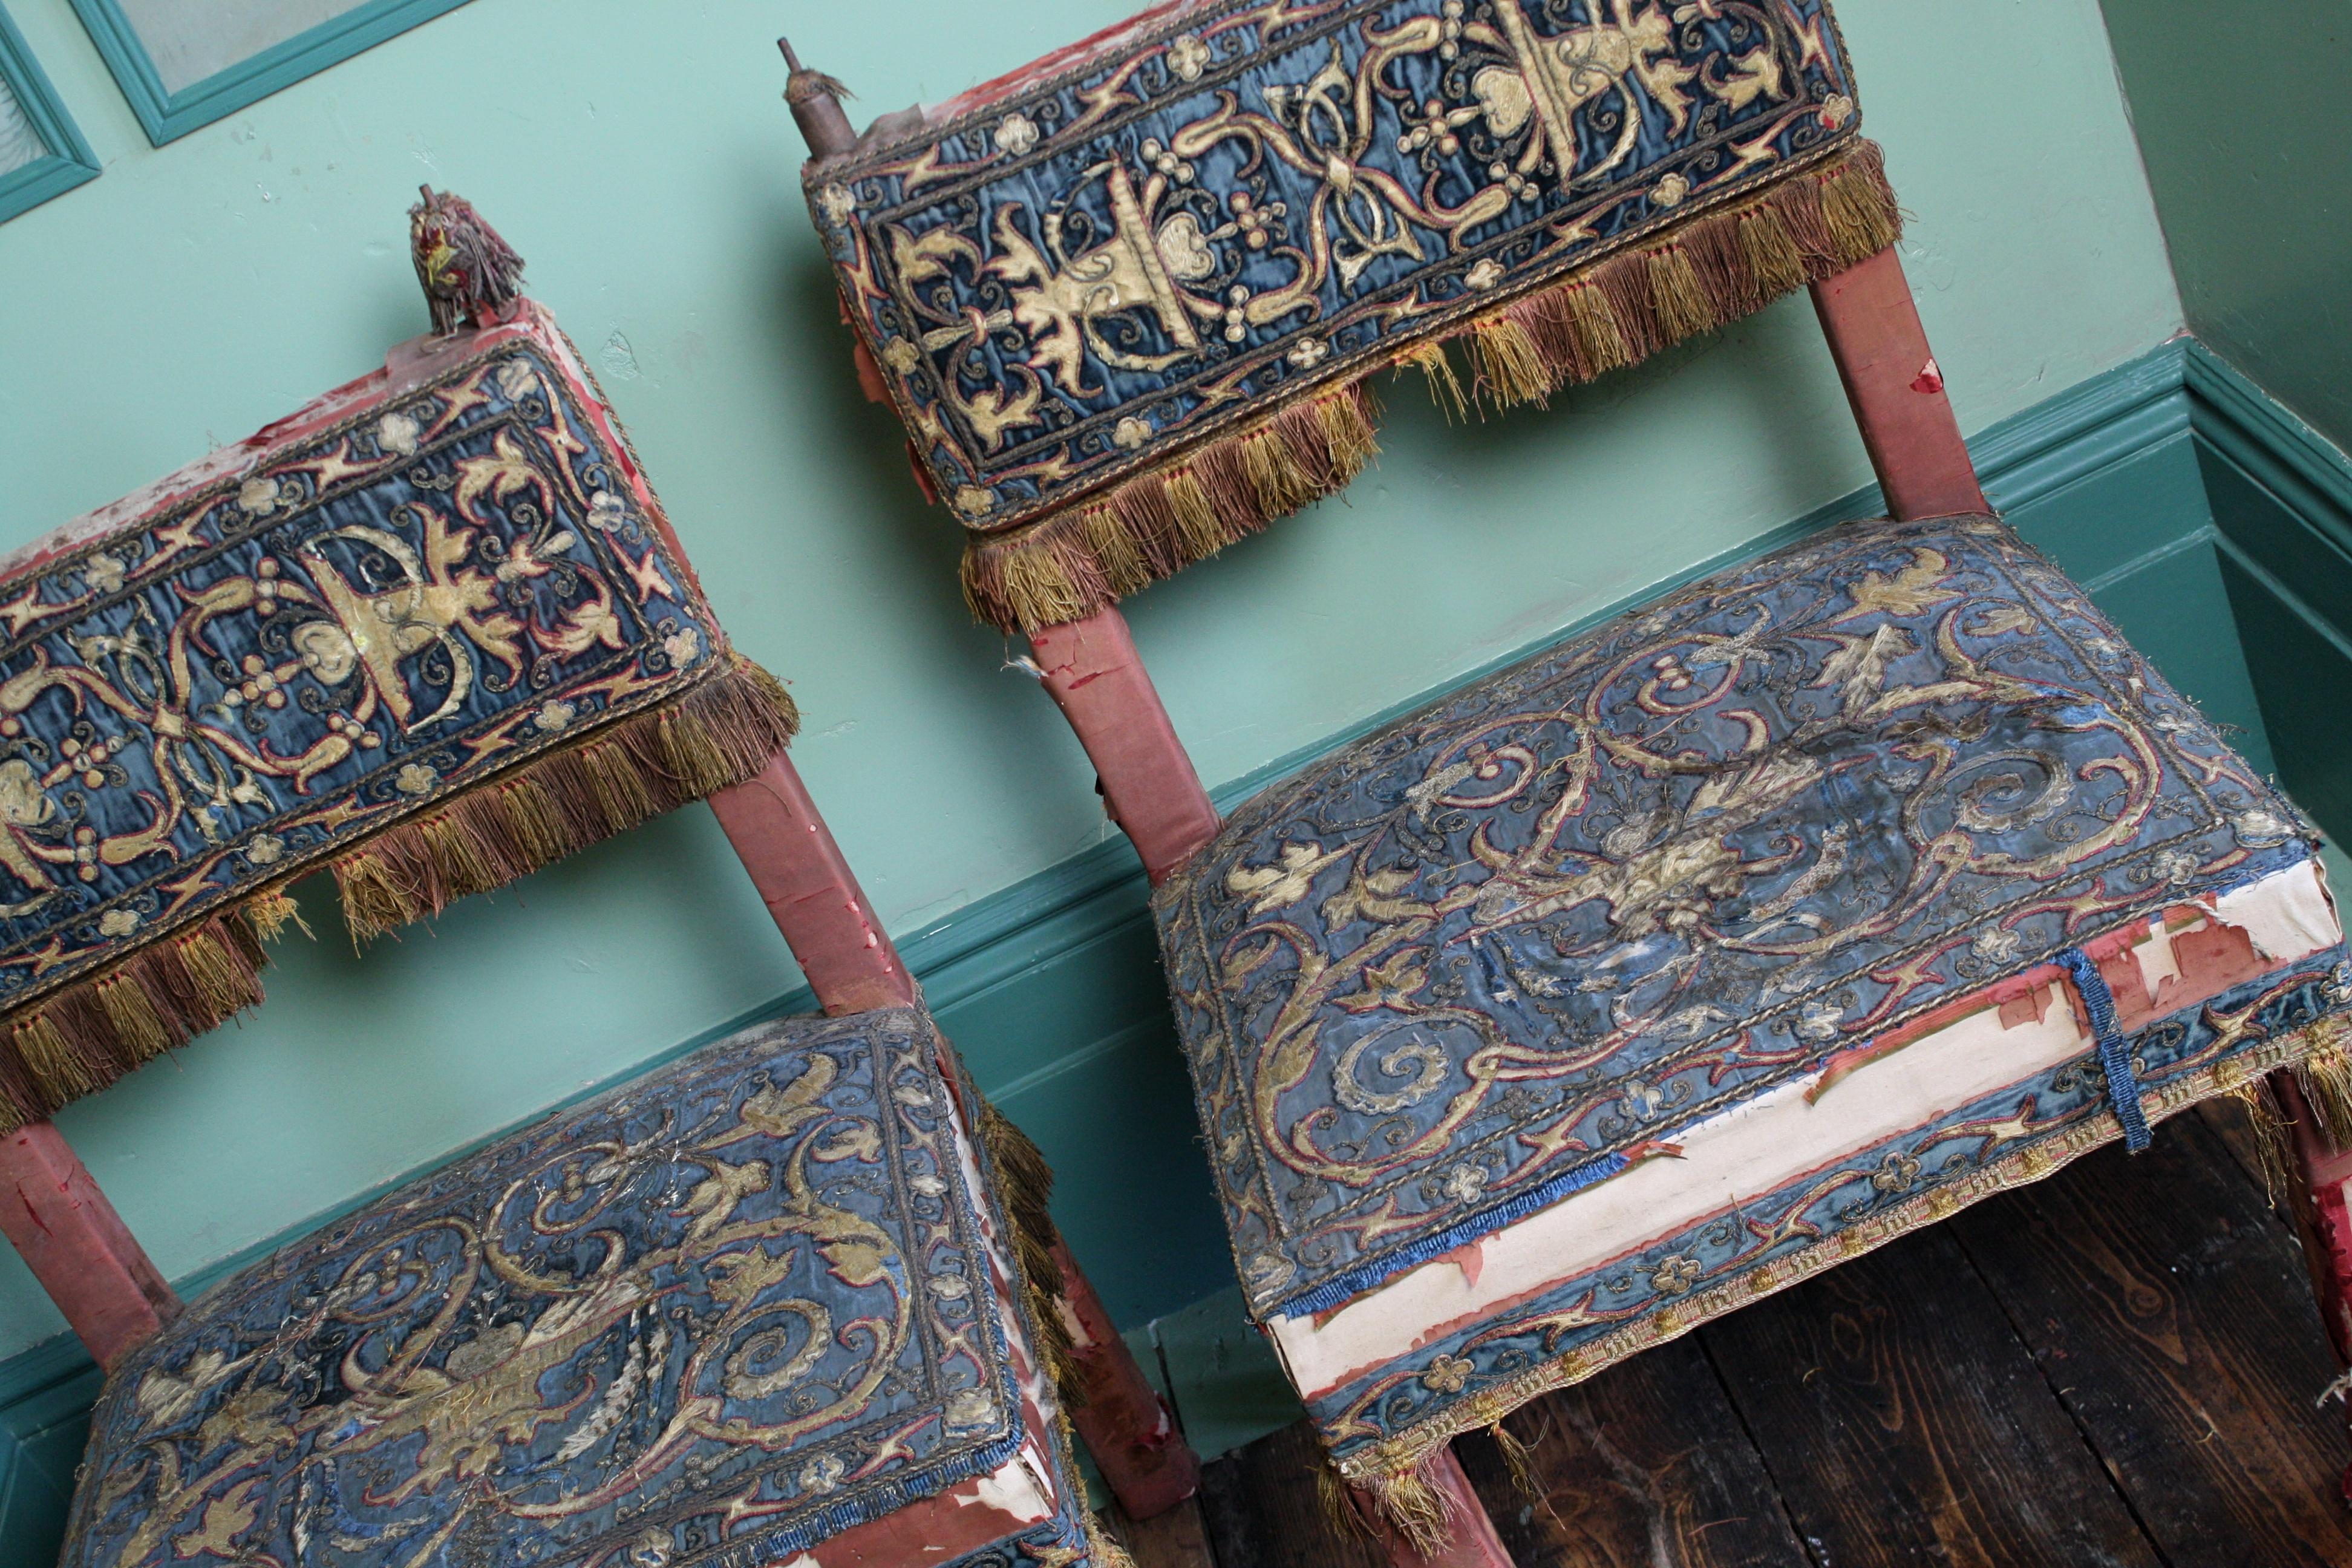 Worn and wonderfully, a sculptural pair of totally unrestored 17th century style chairs, upholstered in silk and wire work floral scrolls by George Trollope & Son 

These chairs would prefer an easy life in their current condition, structurally